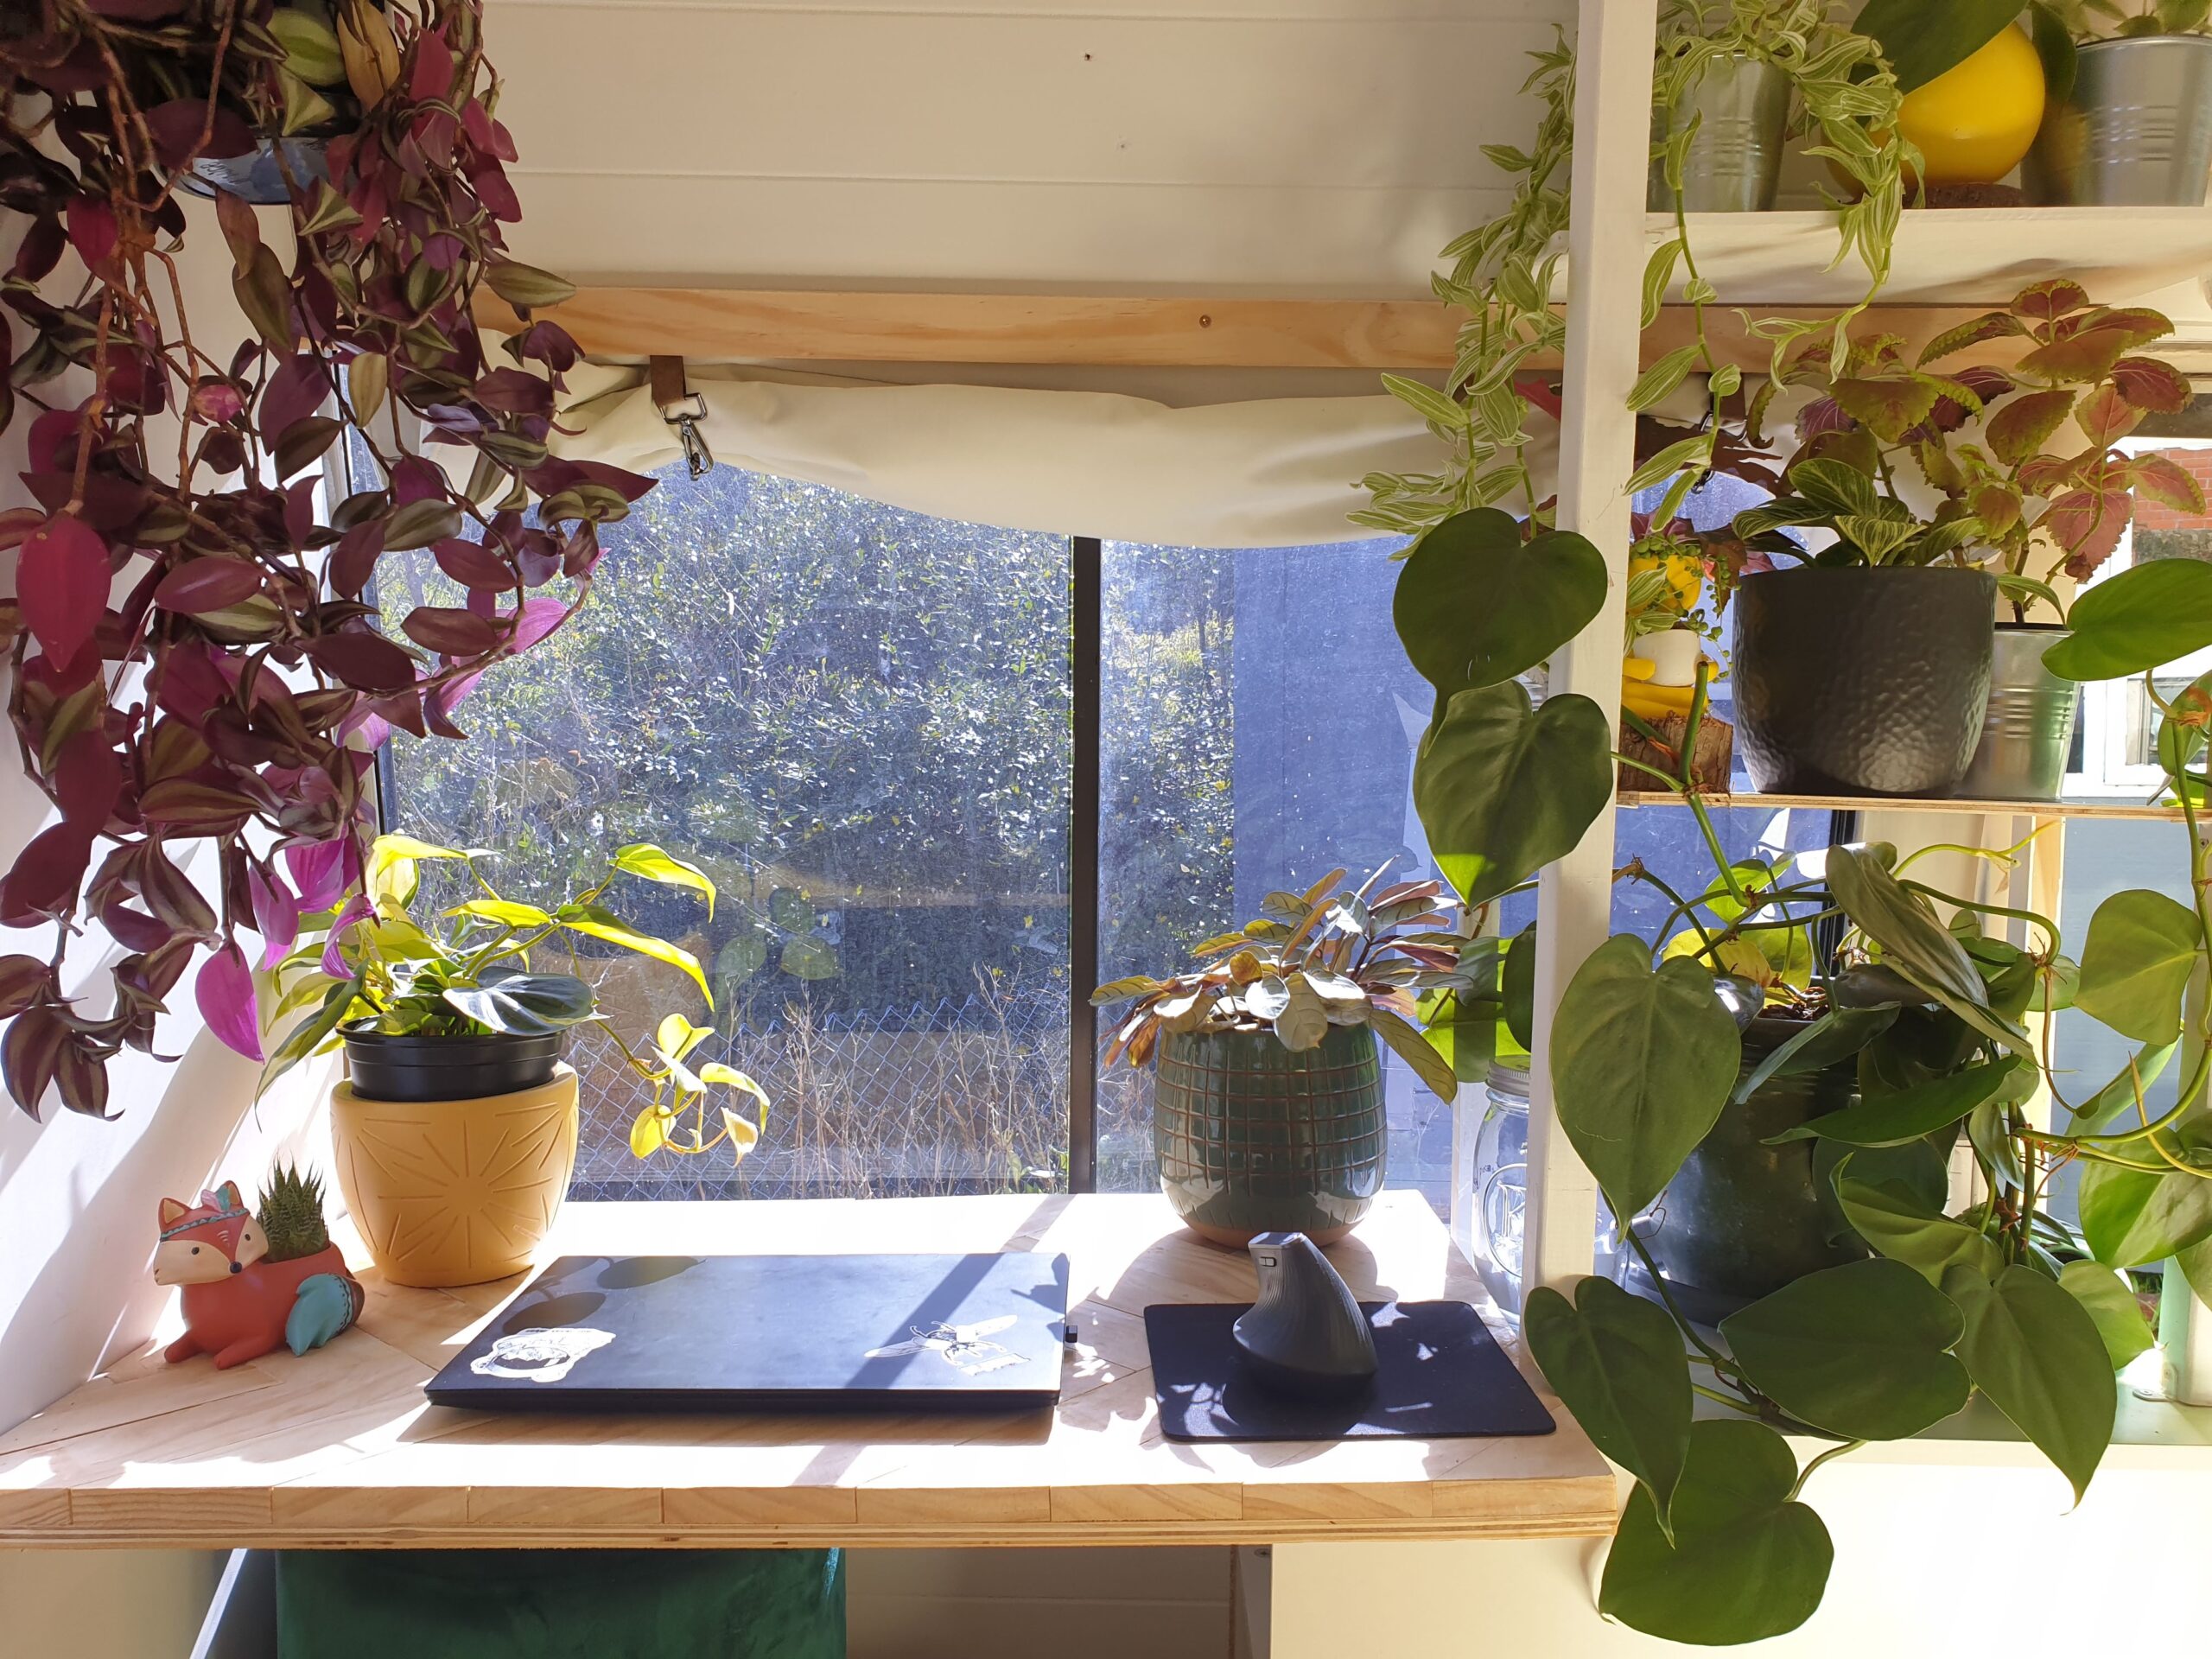 A desk in front of a window, with sunlight filtering through. On the desk is a laptop, and there are indoor plants all around and on the desk.